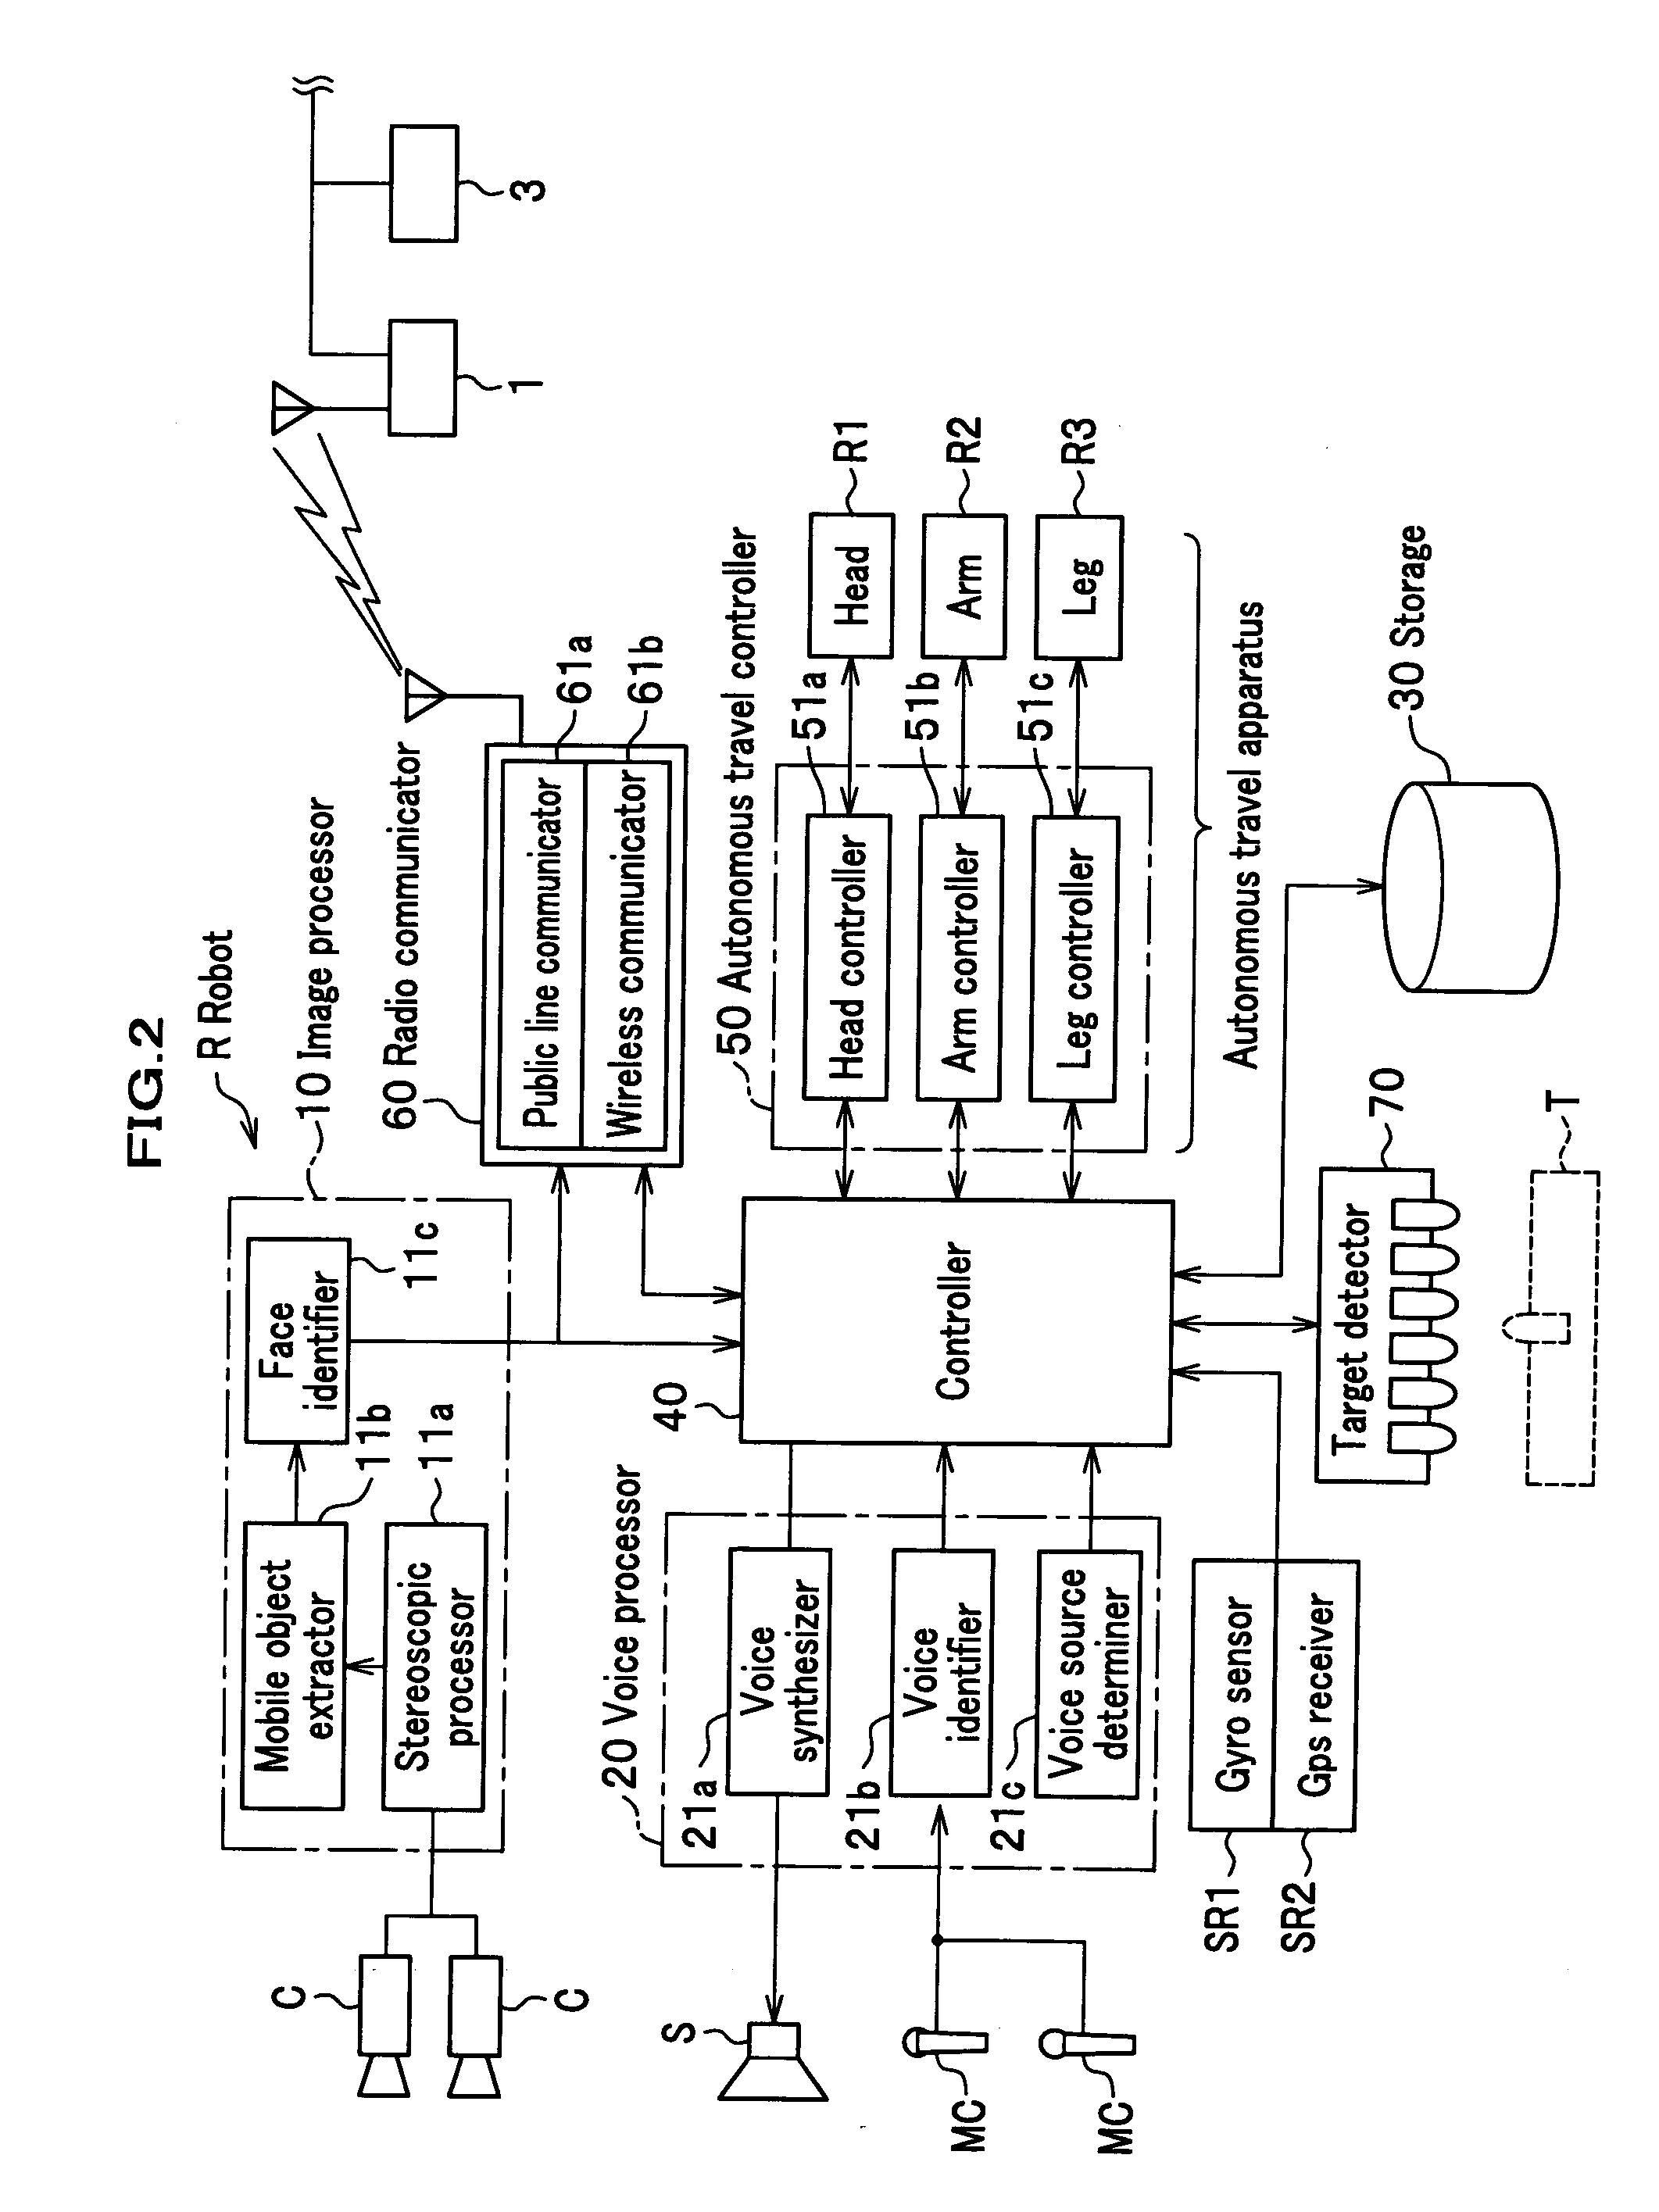 Target object detection apparatus and robot provided with the same